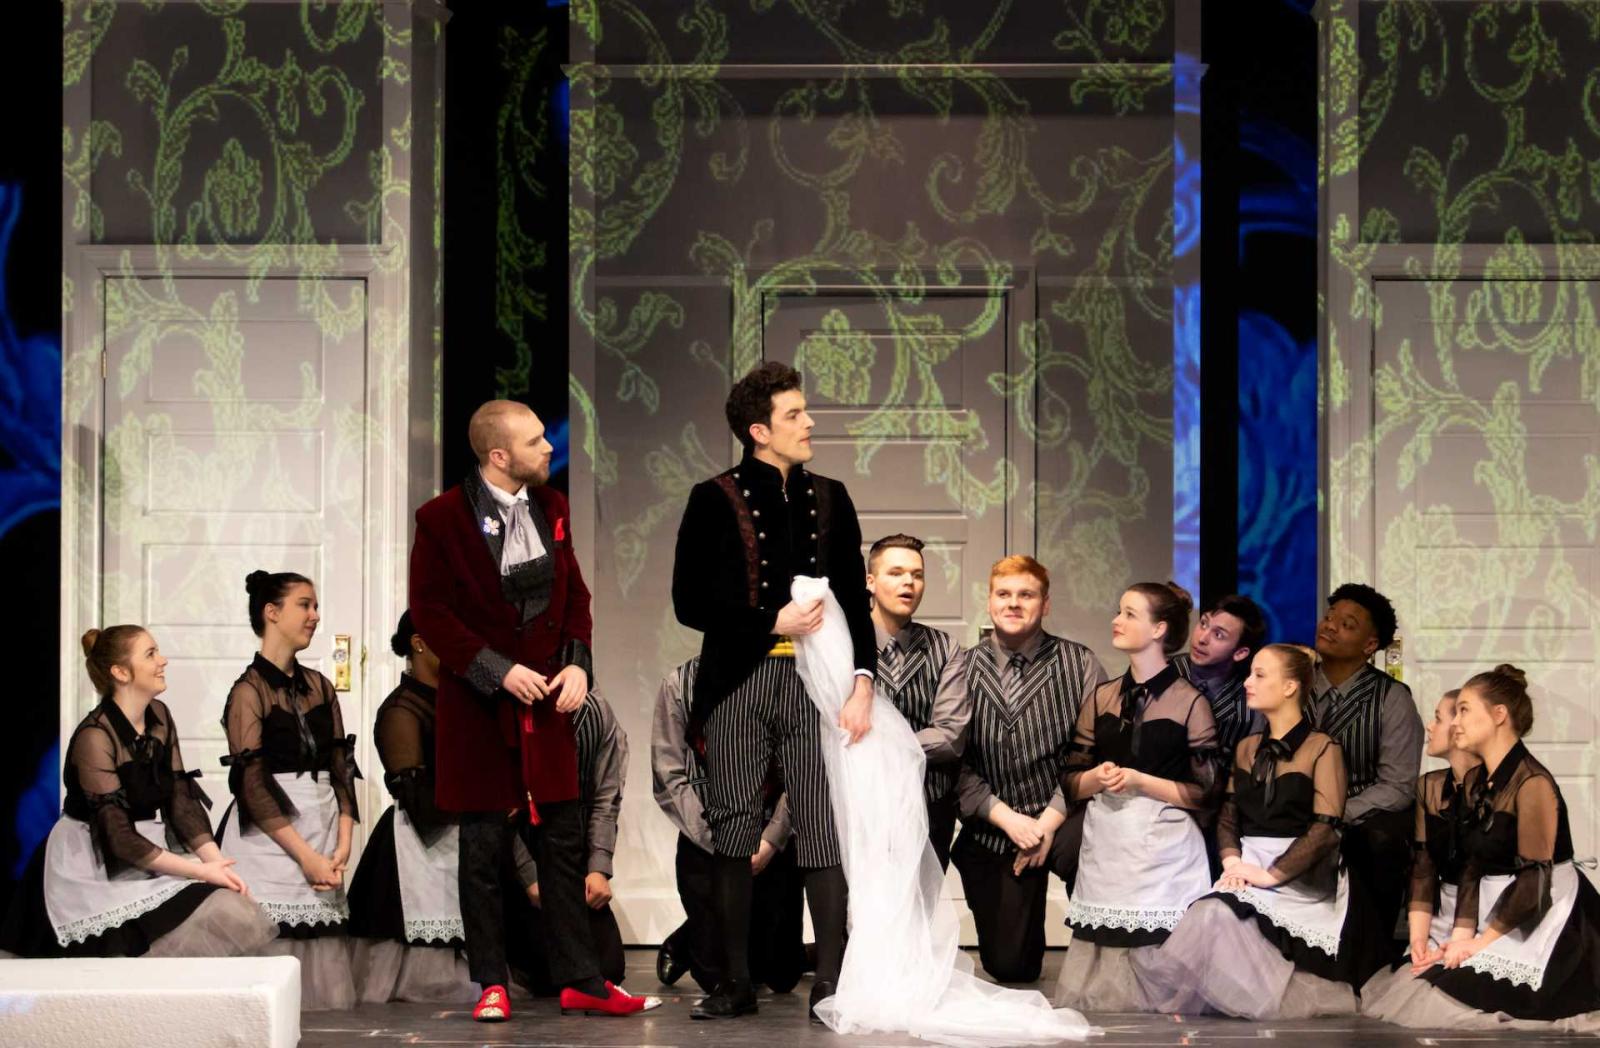 Erik Nordstrom as Count Almaviva and Max Muter as Figaro stand while chorus kneels down watching them, during a dress rehearsal for The Marriage of Figaro.